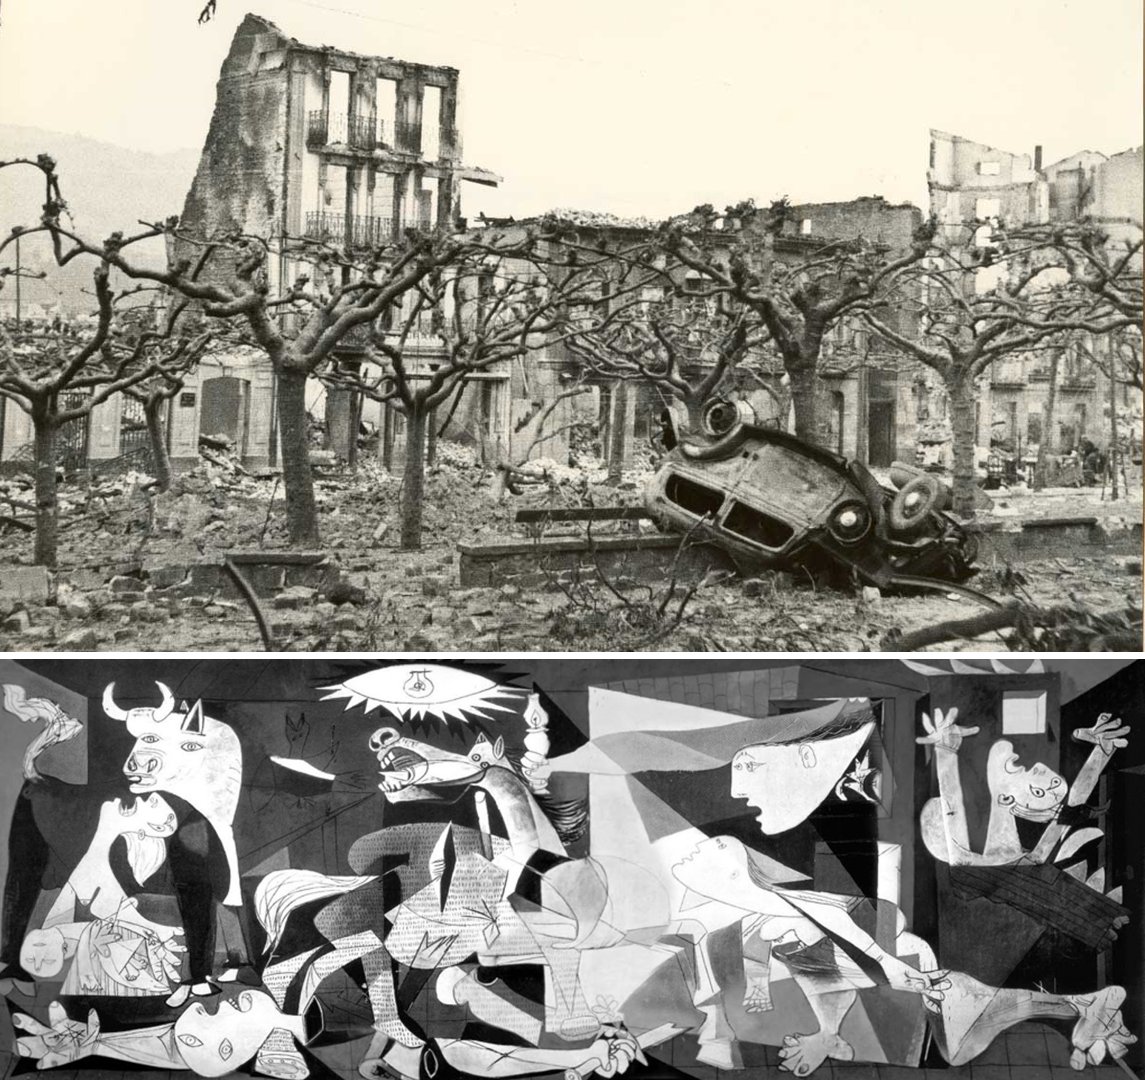 #OtD 26 Apr 1937 the ancient Basque city of Guernica was bombed and largely obliterated by the German and Italian air forces at the behest of the Spanish nationalists during the civil war. The event was famously depicted by Picasso. More in this podcast: workingclasshistory.com/2020/06/17/e39…